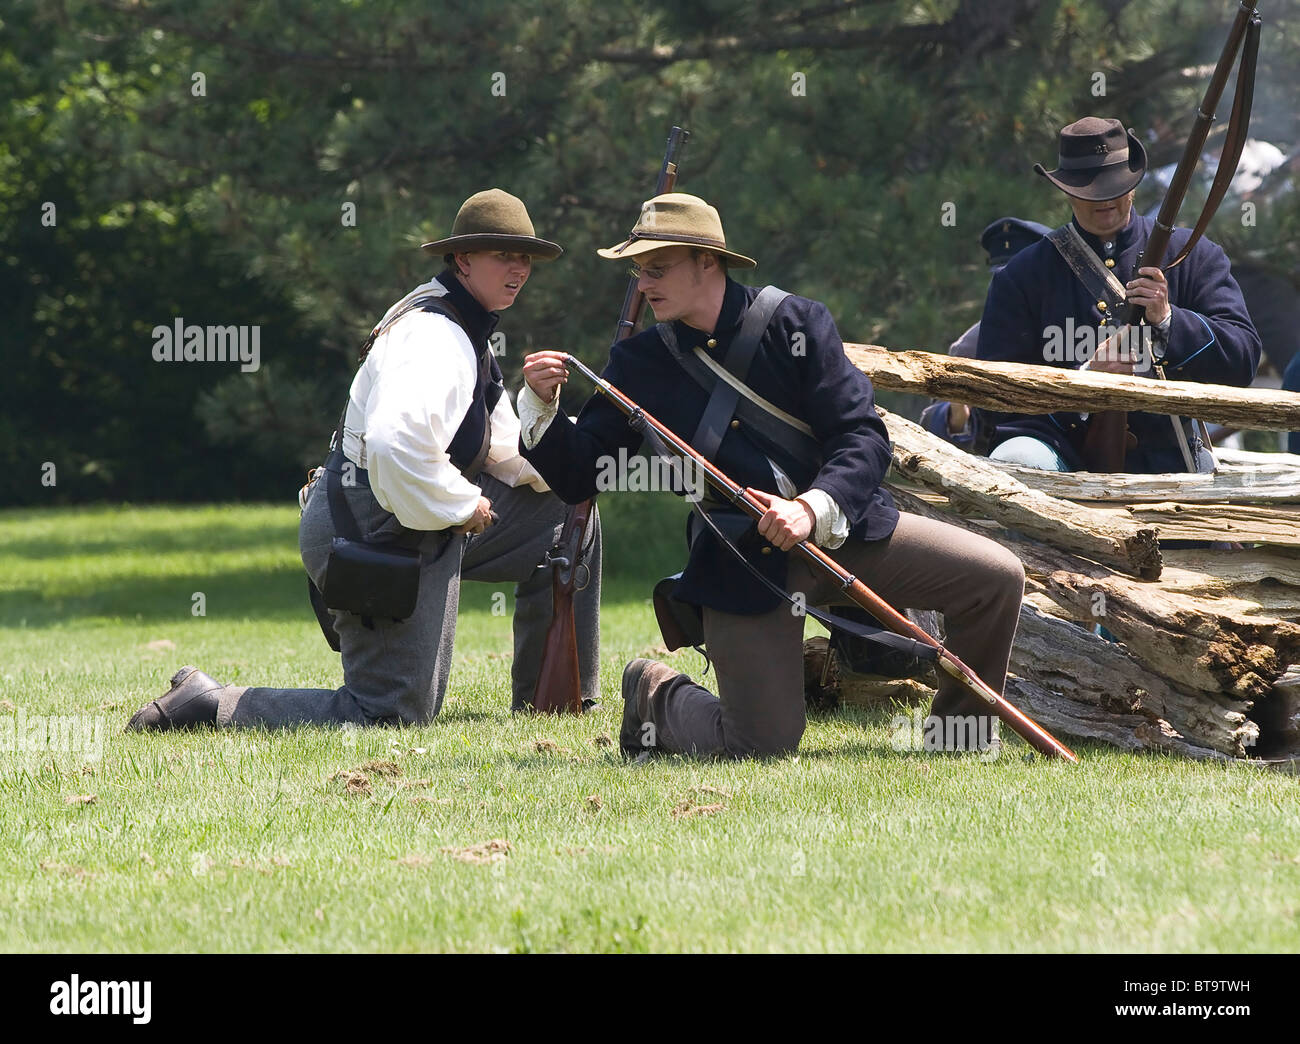 Members of the attacking Fenian Army occupy a position during a reenactment of the Fenian Raids at Old Fort Erie in Ontario. Stock Photo